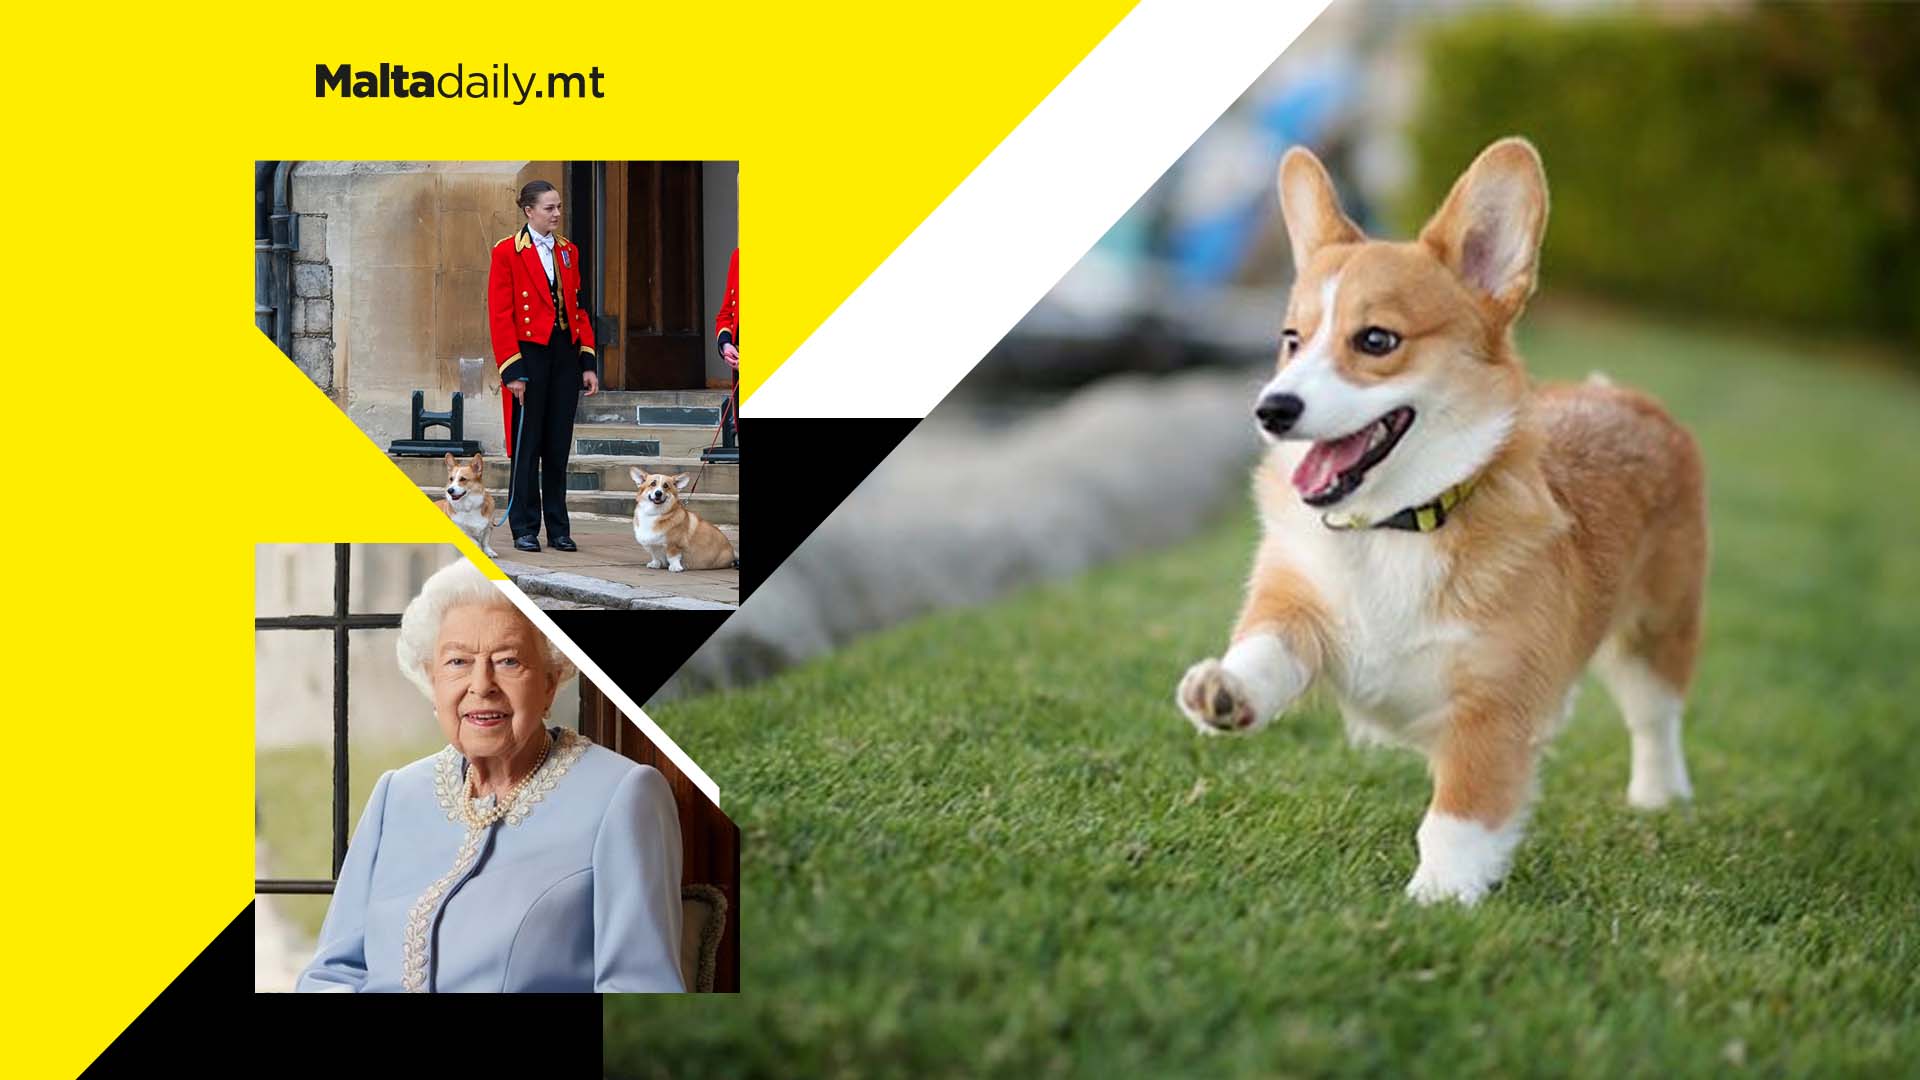 Demand and price of corgis sky-rockets after Queen's funeral